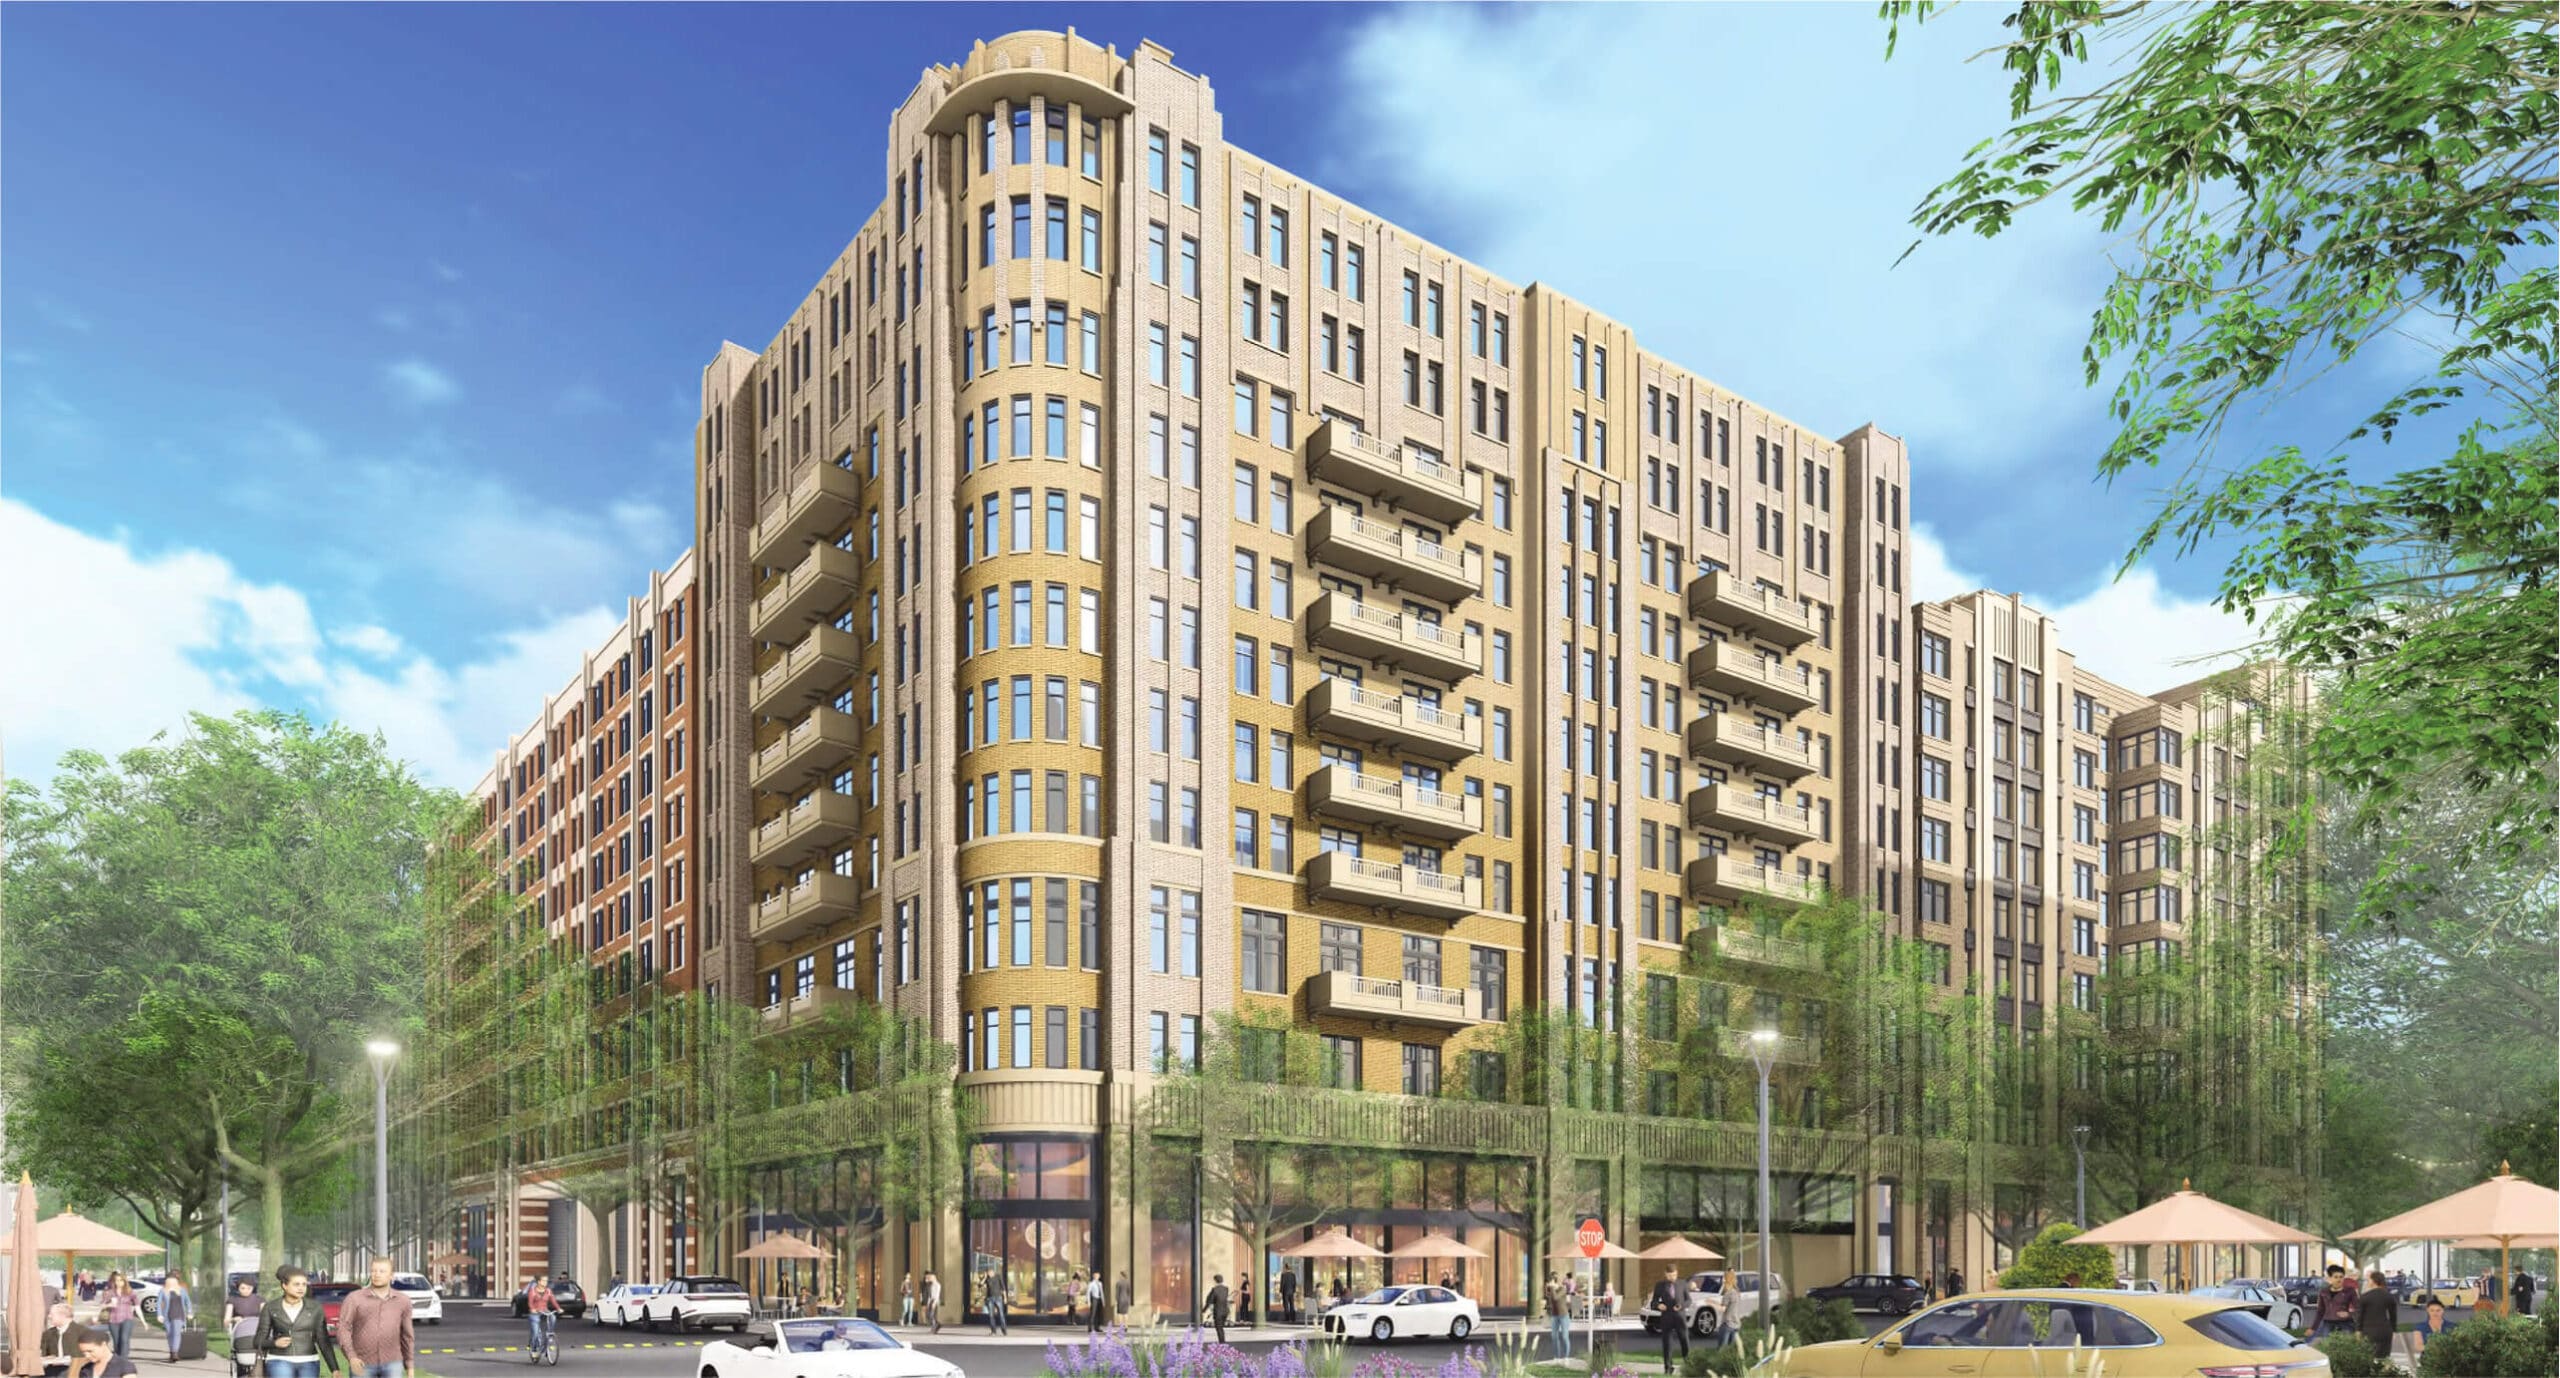 First Stage Of Development at Twinbrook Quarter (Including Wegmans) Approved